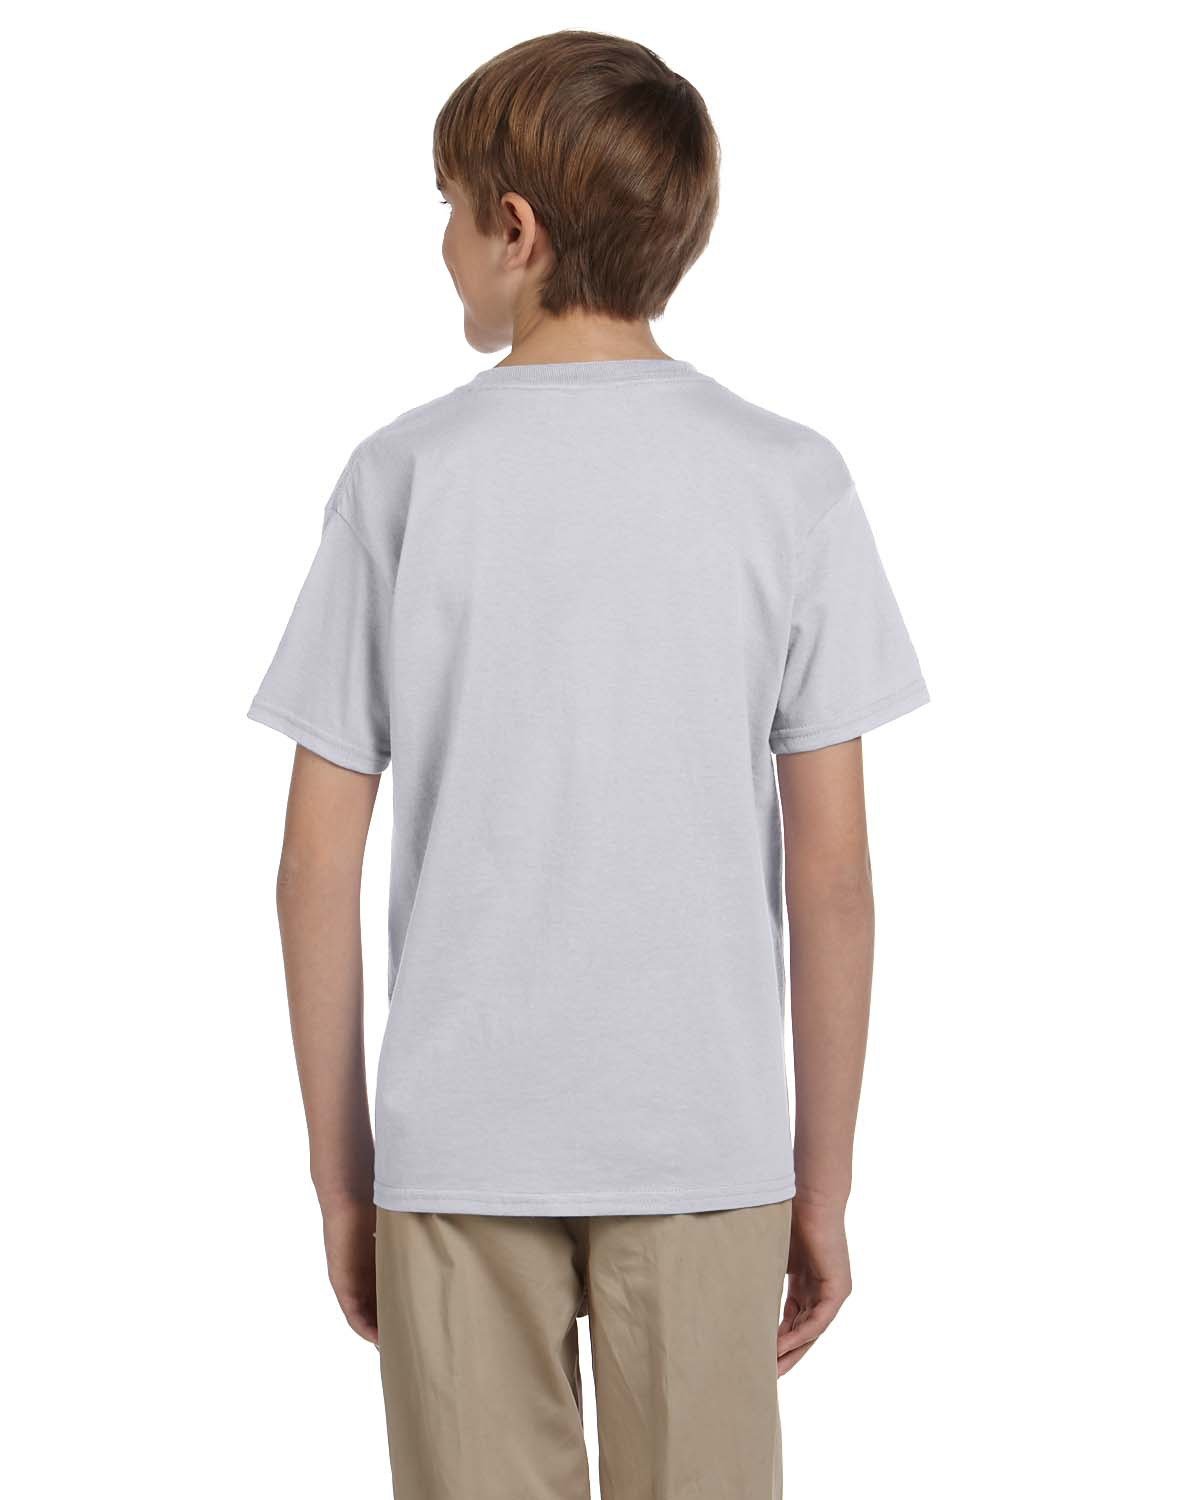 Hanes Youth 50/50 T-Shirt | alphabroder